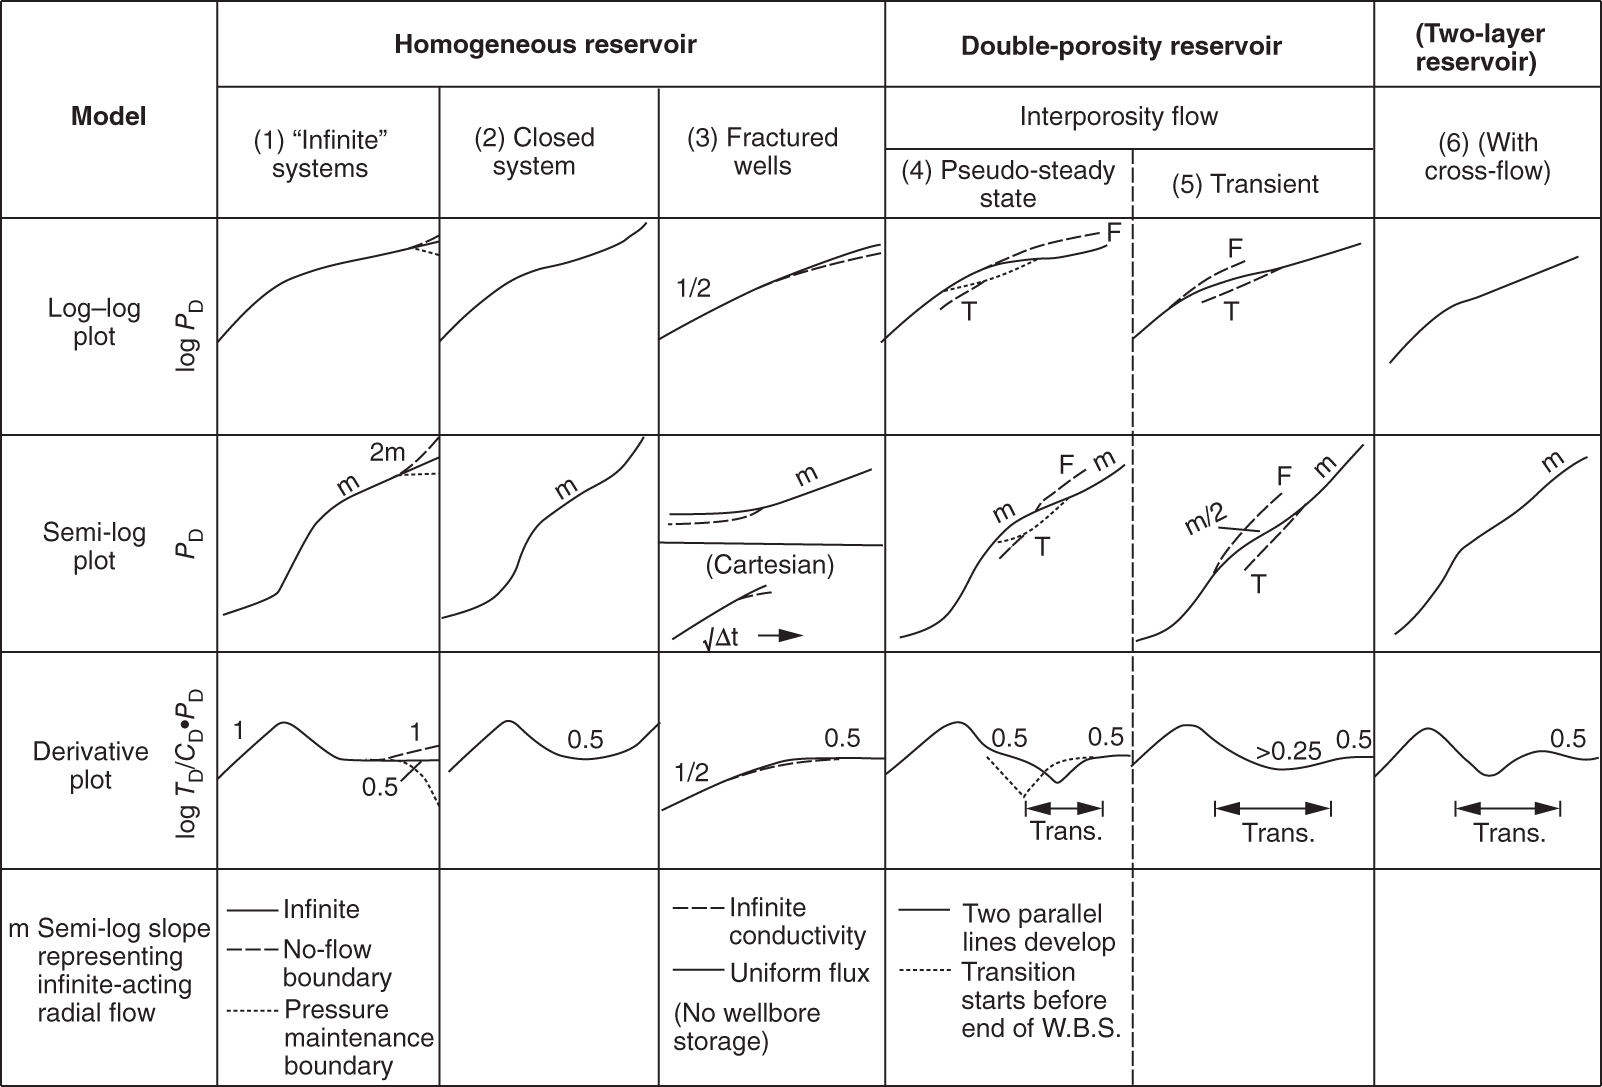 Chart providing a summary of well/reservoir responses to testing in different reservoir systems - homogeneous, double-porosity, and two-layer reservoirs.